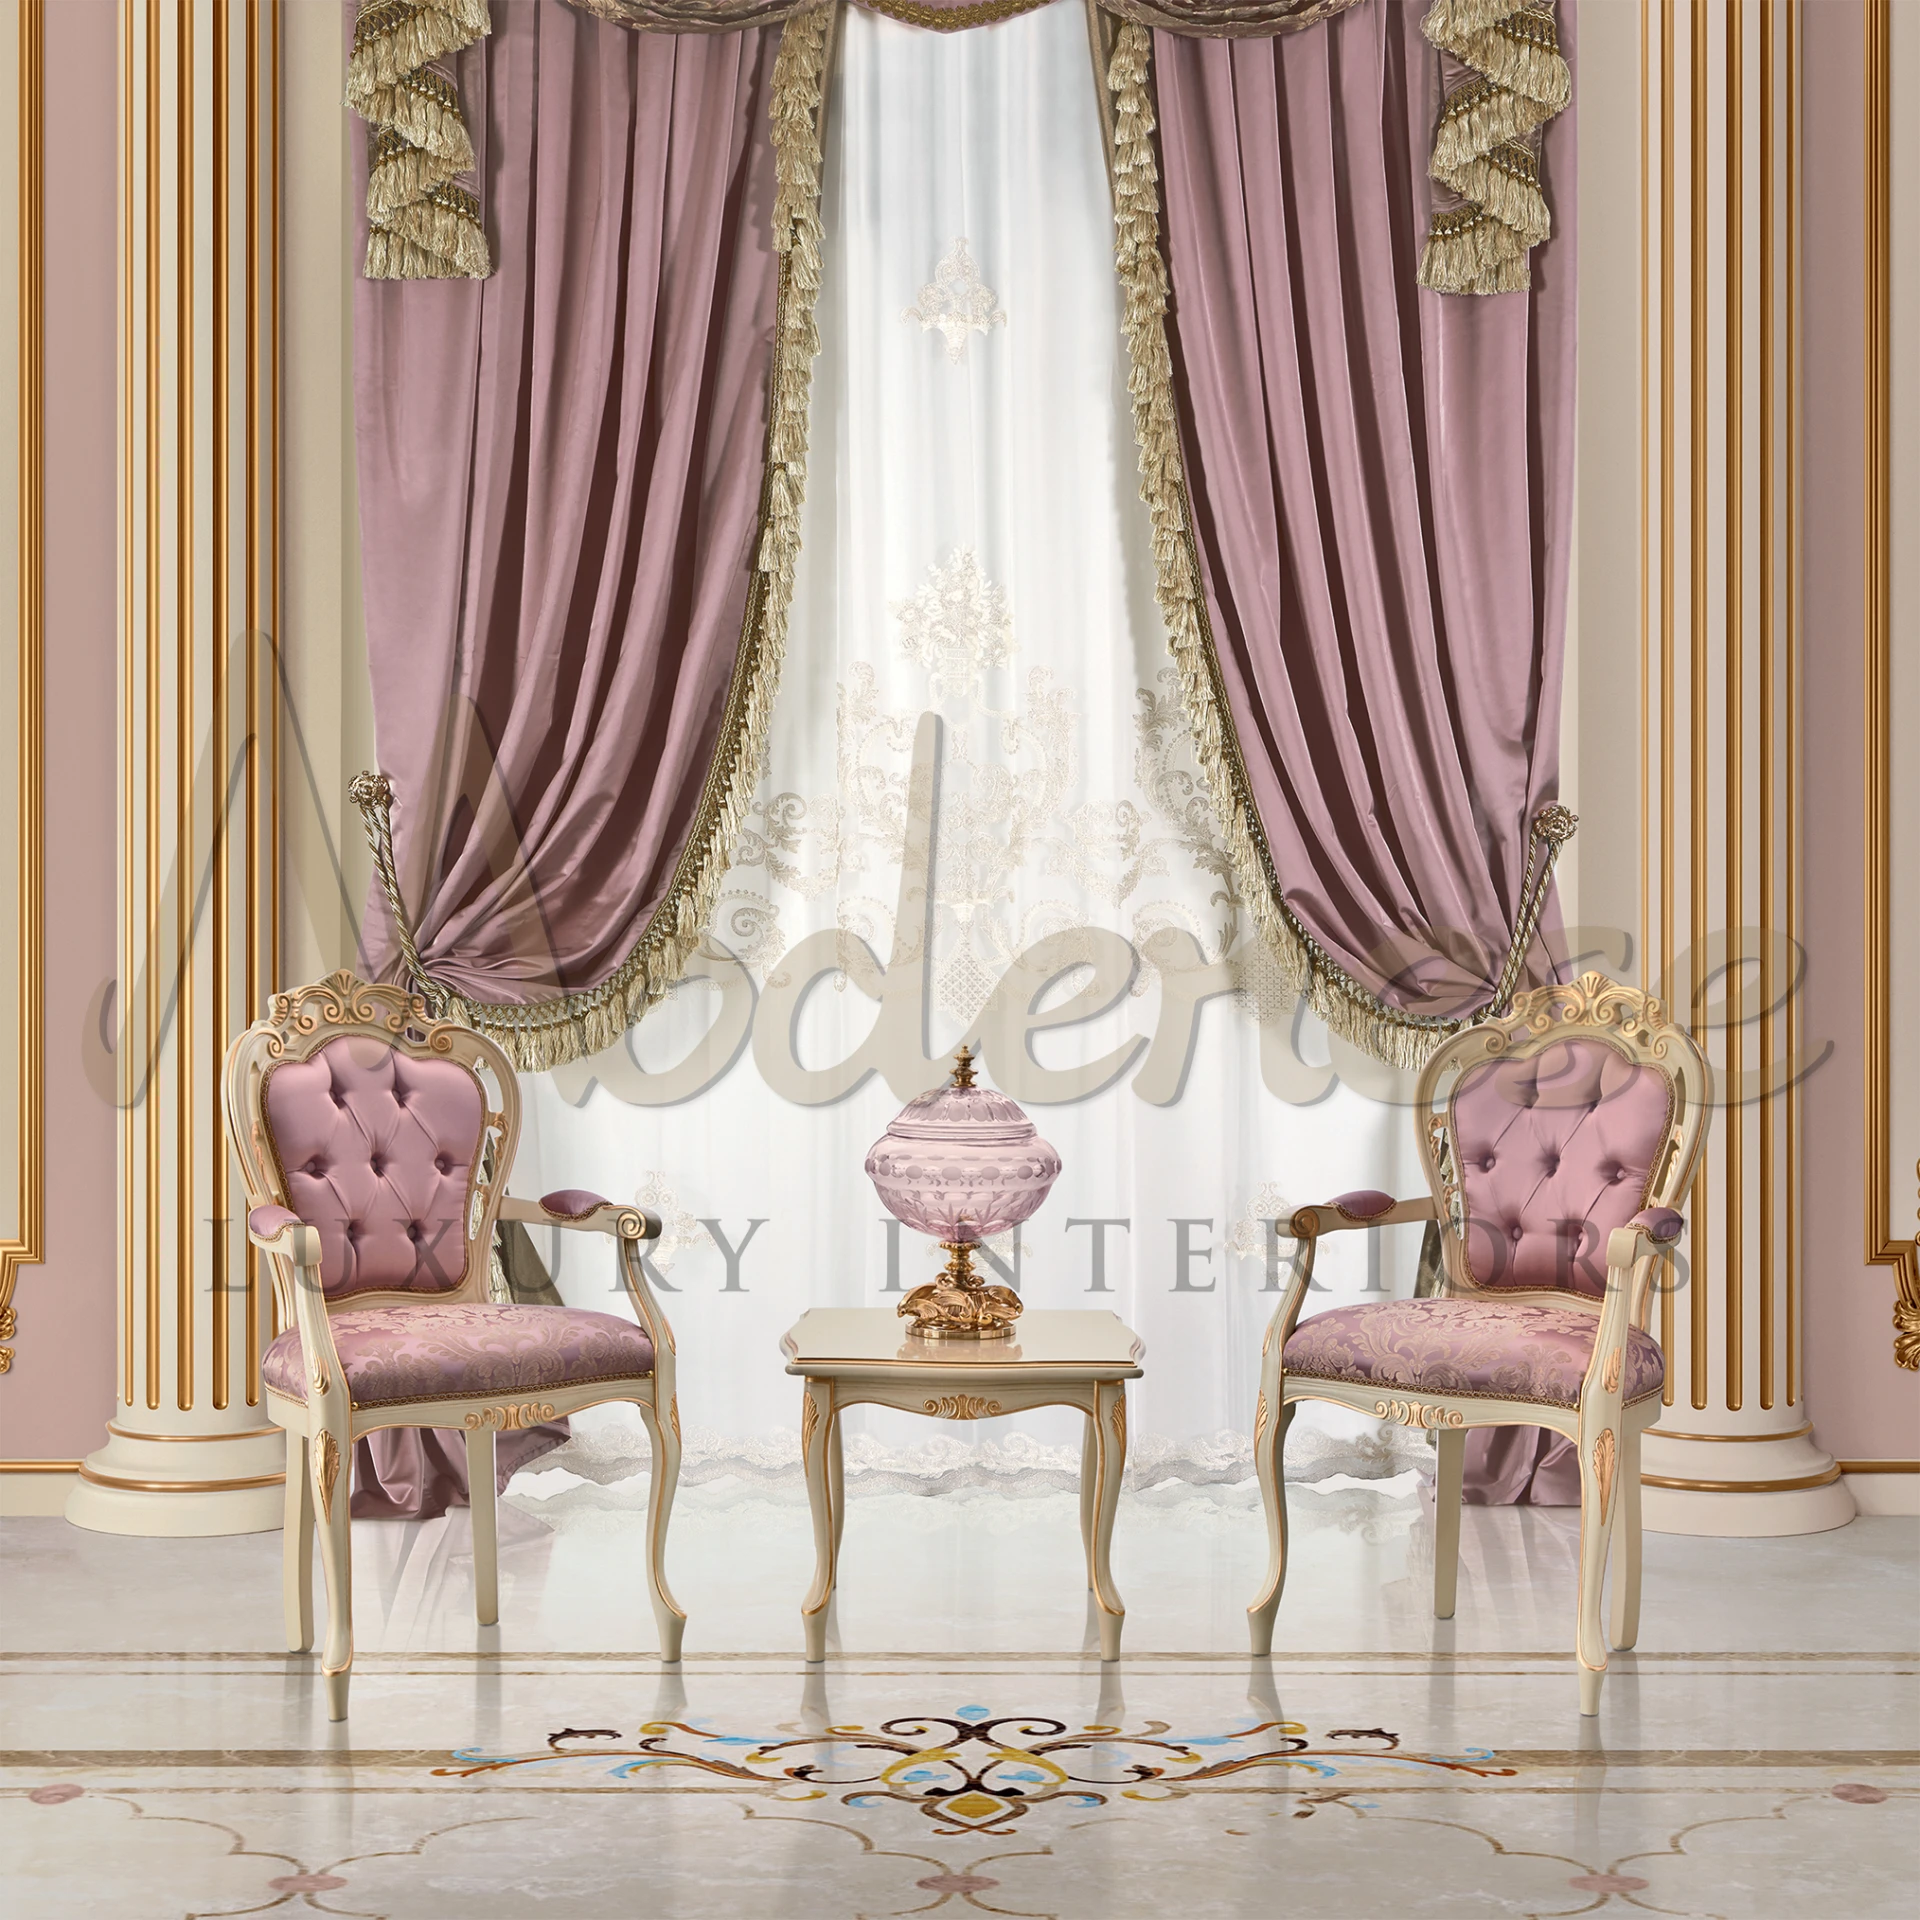 Two stylish Italian hand made pink chairs flanking a small table with a decorative vase against fancy pink drapery and wallpaper.